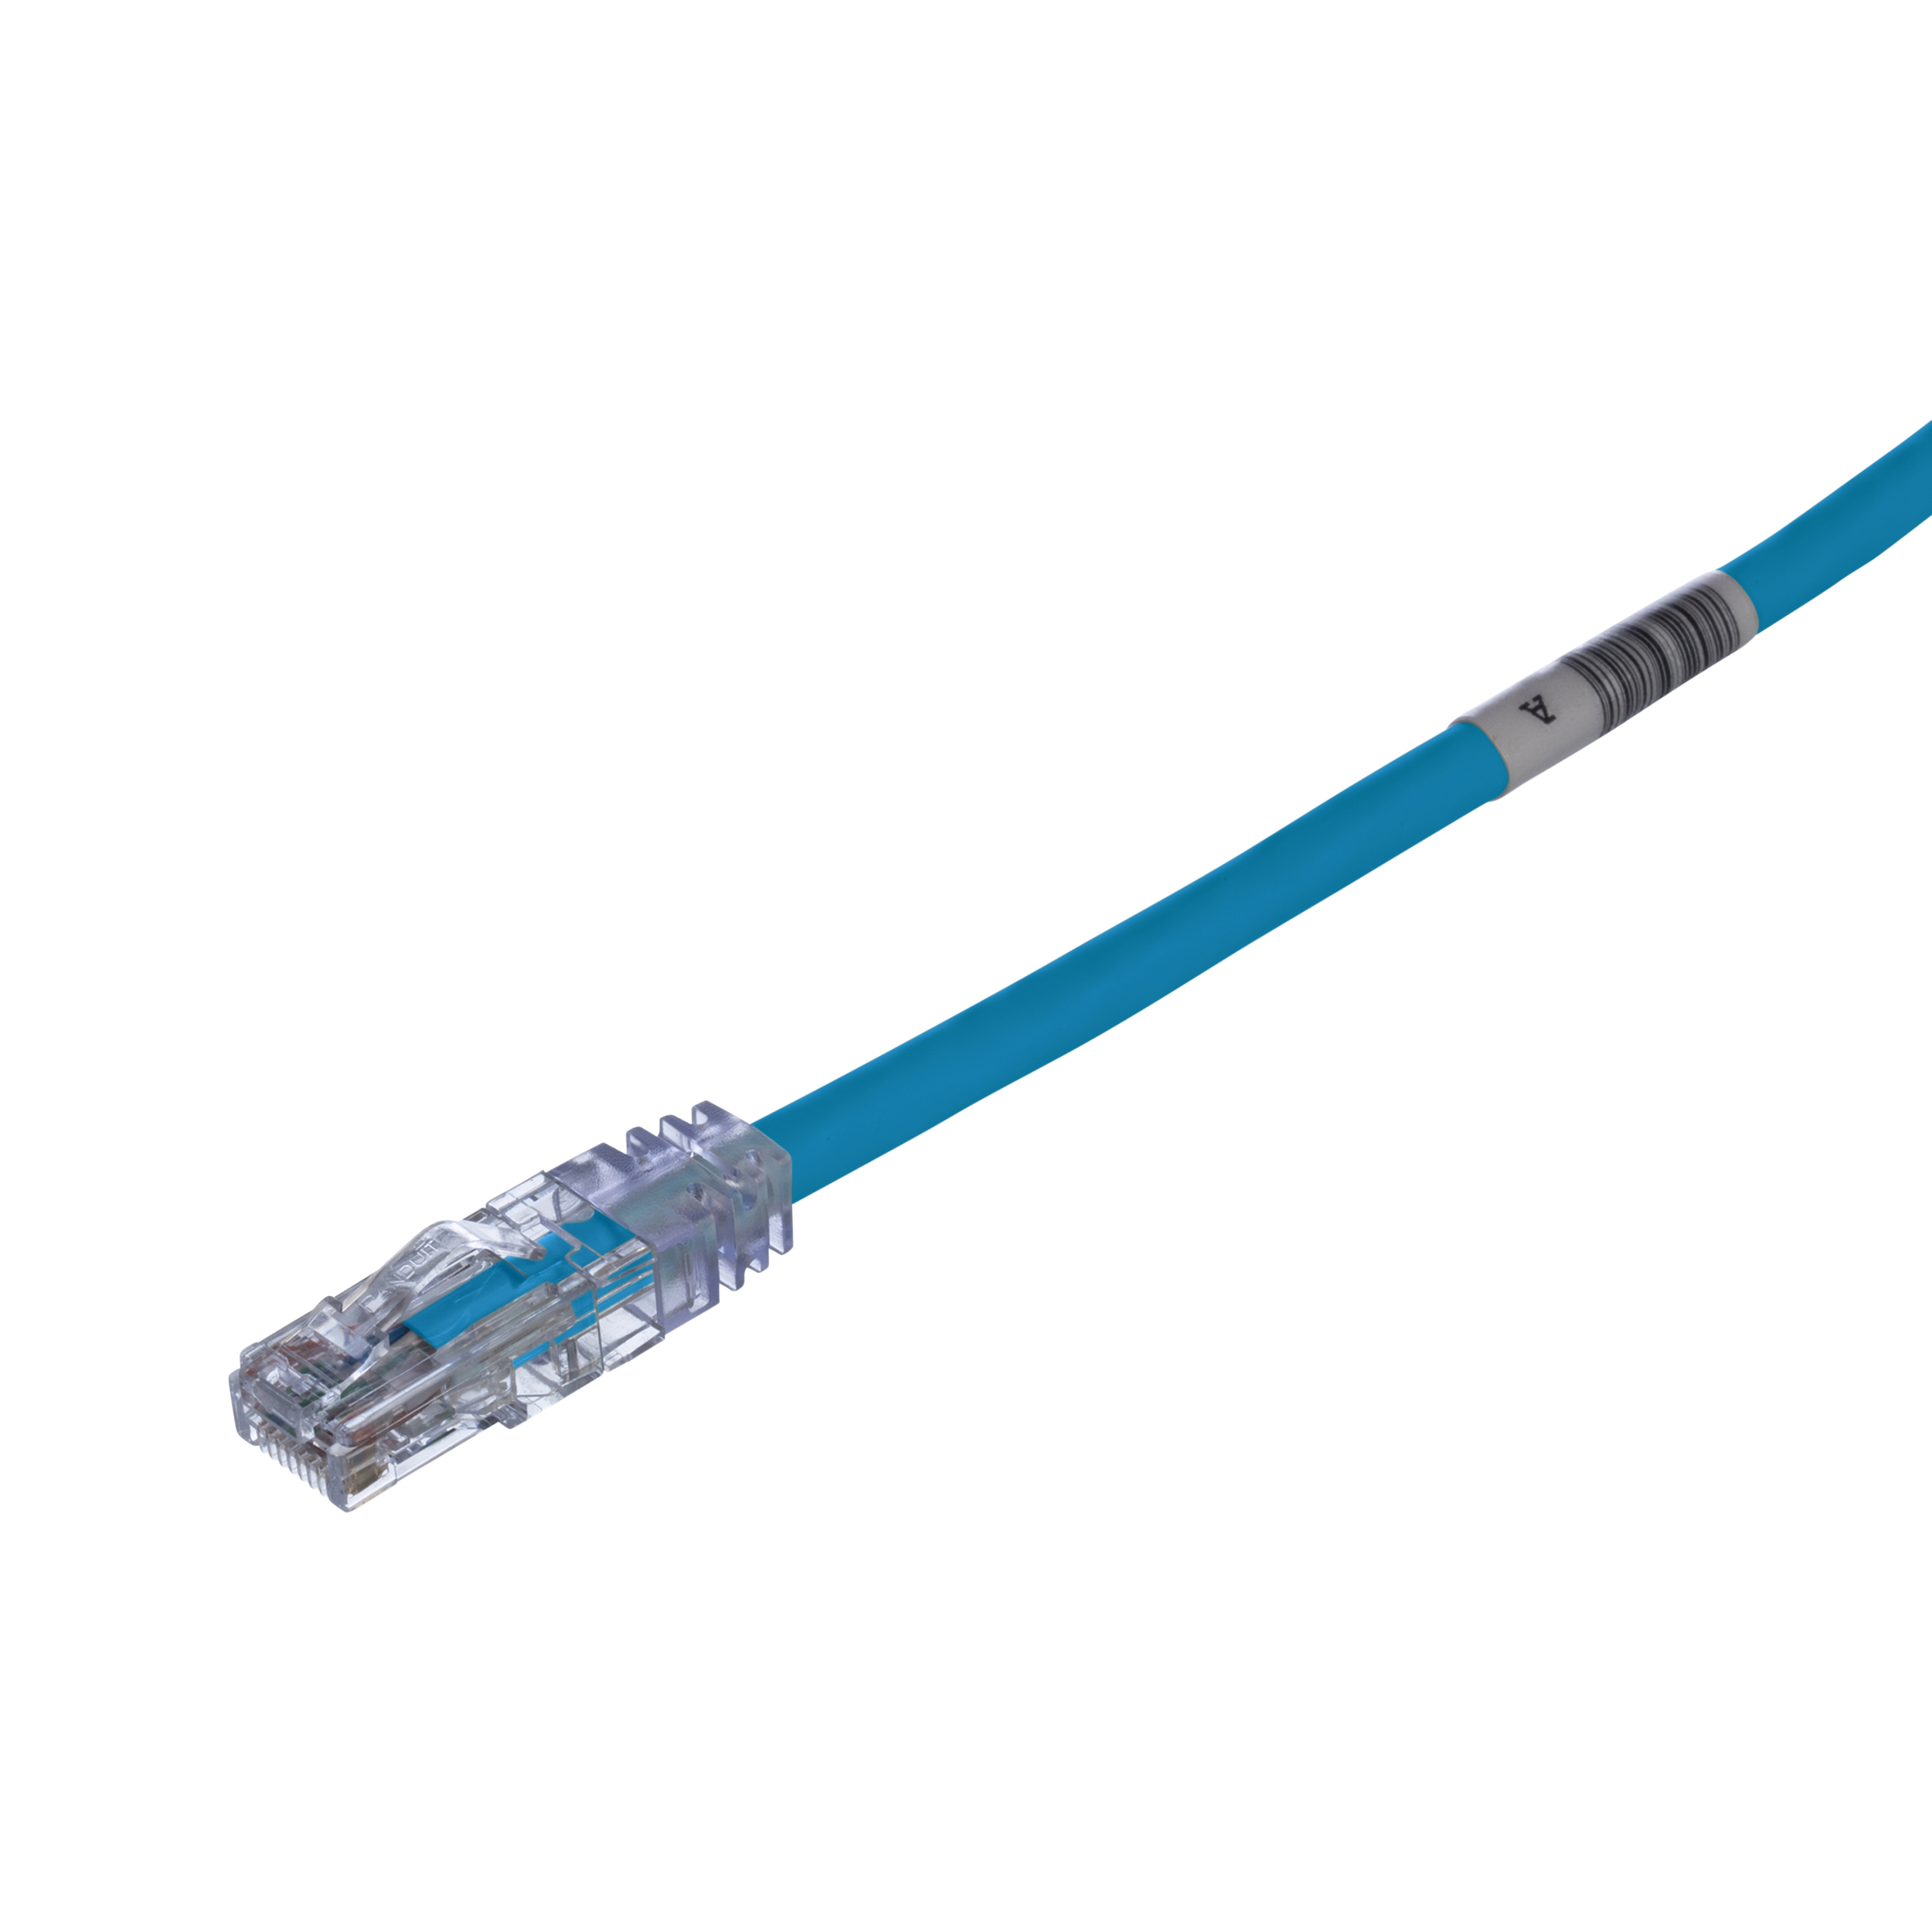 Cat 6 24 AWG UTP Copper Patch Cord, 6 ft, Blue